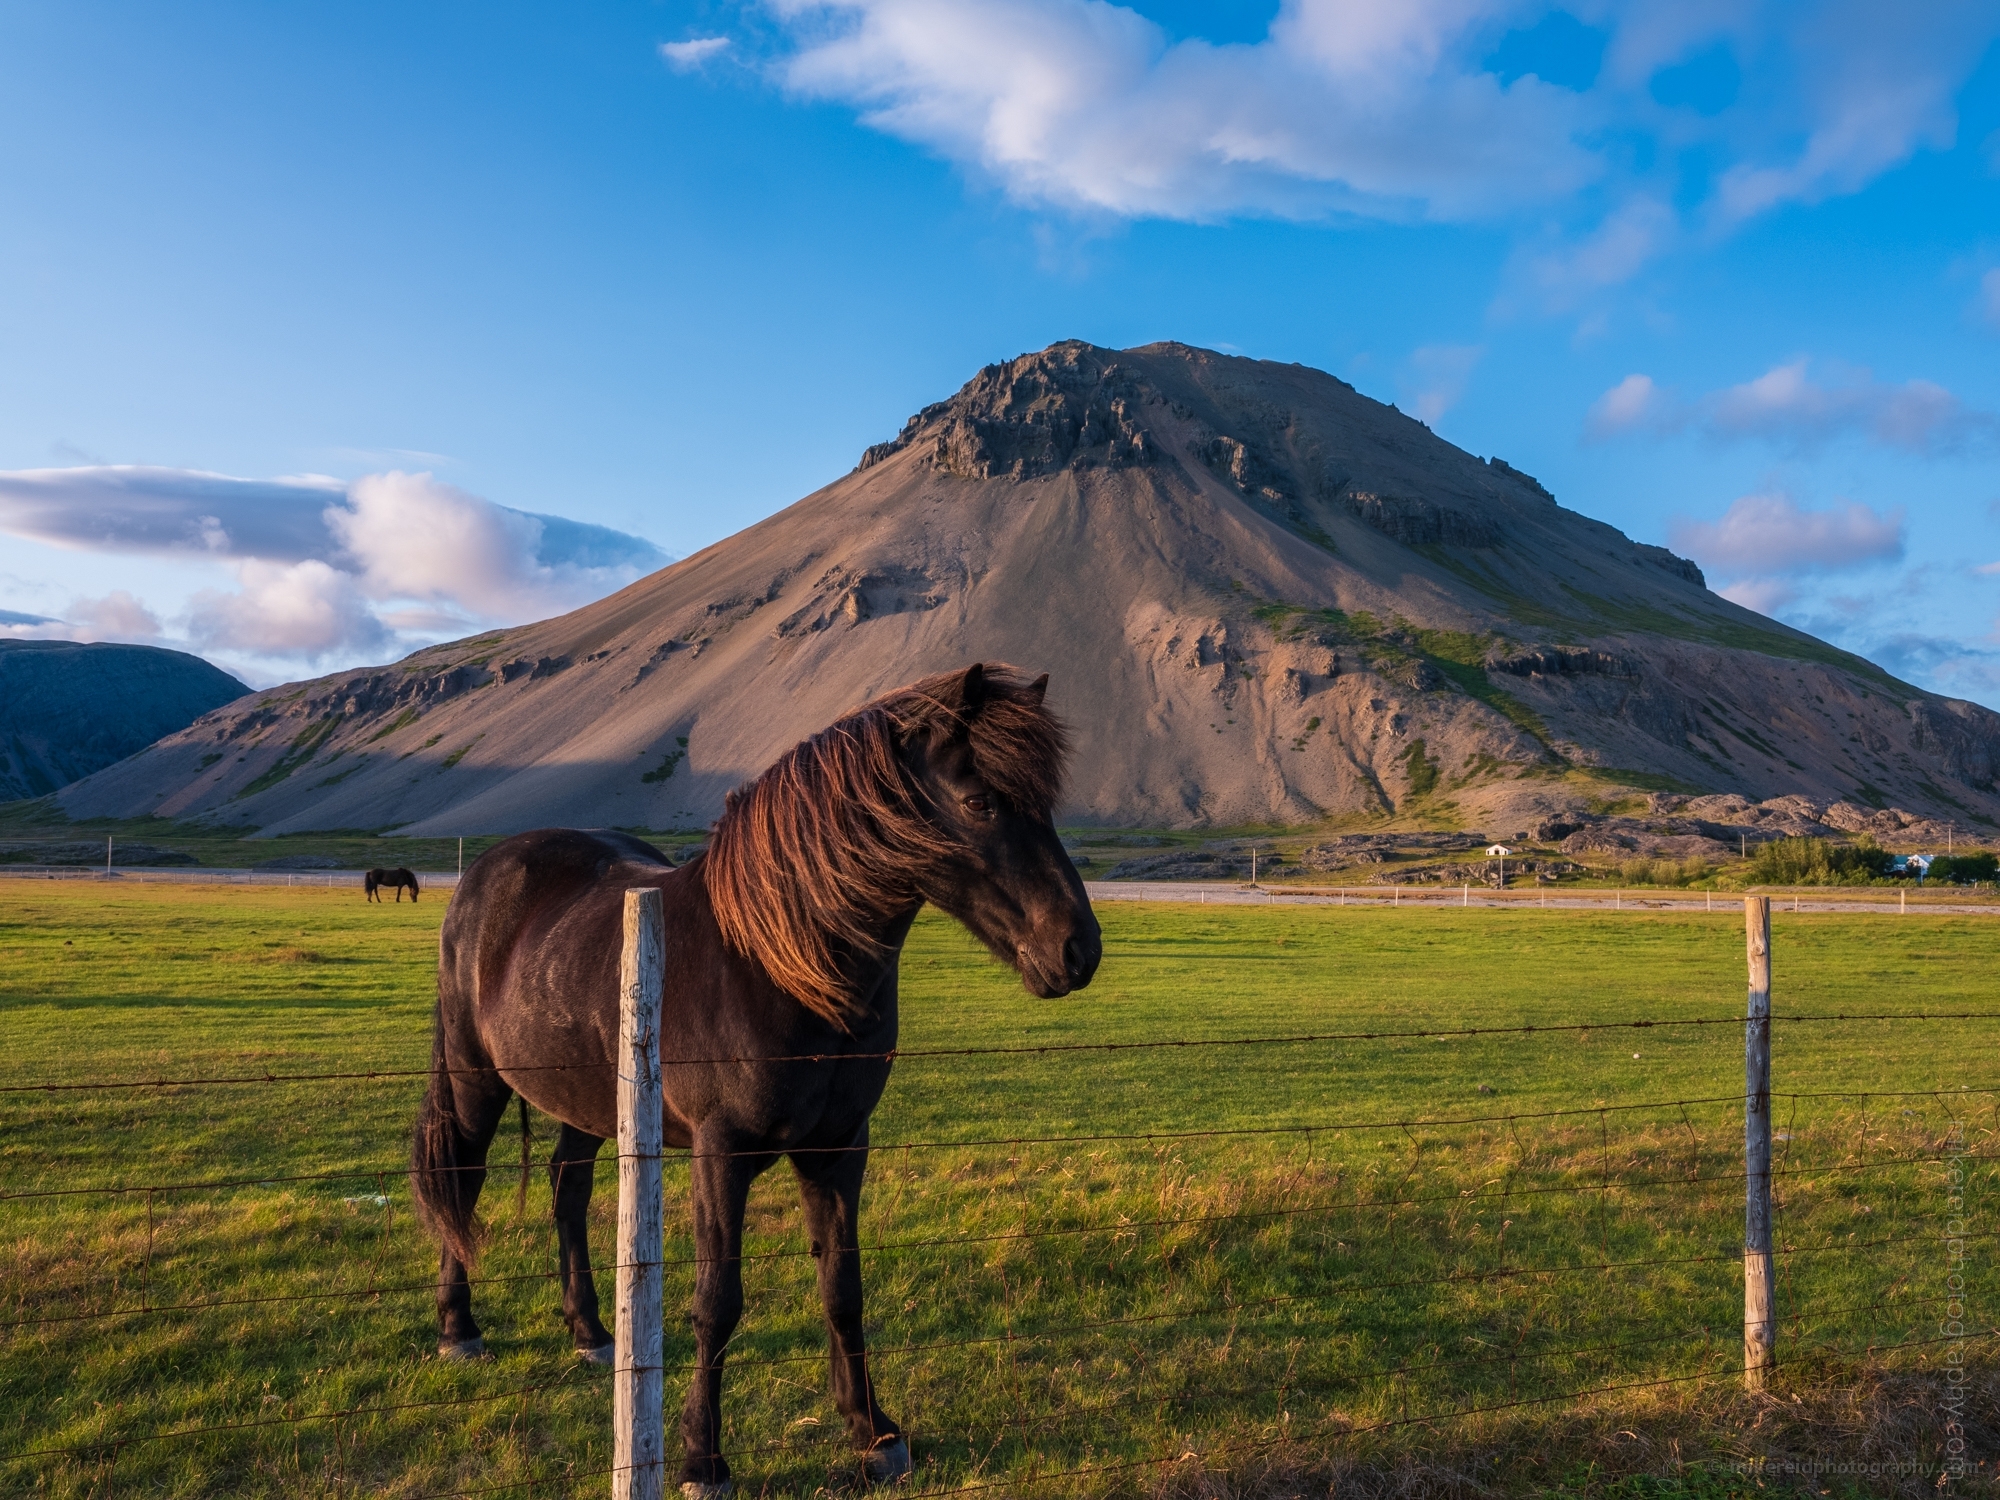 Iceland Horse Closeup GFX50s.jpg Honestly this trip changed my life....crazy as that sounds. I did the Everest base camp trek in Feb and Banff in June and they paled in comparison. The thing about Iceland is sometimes we shooters go on trips and feel pressure to get great shots. But Iceland is so awesome that the amazing shots just keep throwing themselves at you. Its just relentless. At some point I just relaxed and took it all in. 7 trips later, I can't wait to go back this year. Please contact me for your own Iceland Photography tour. #iceland